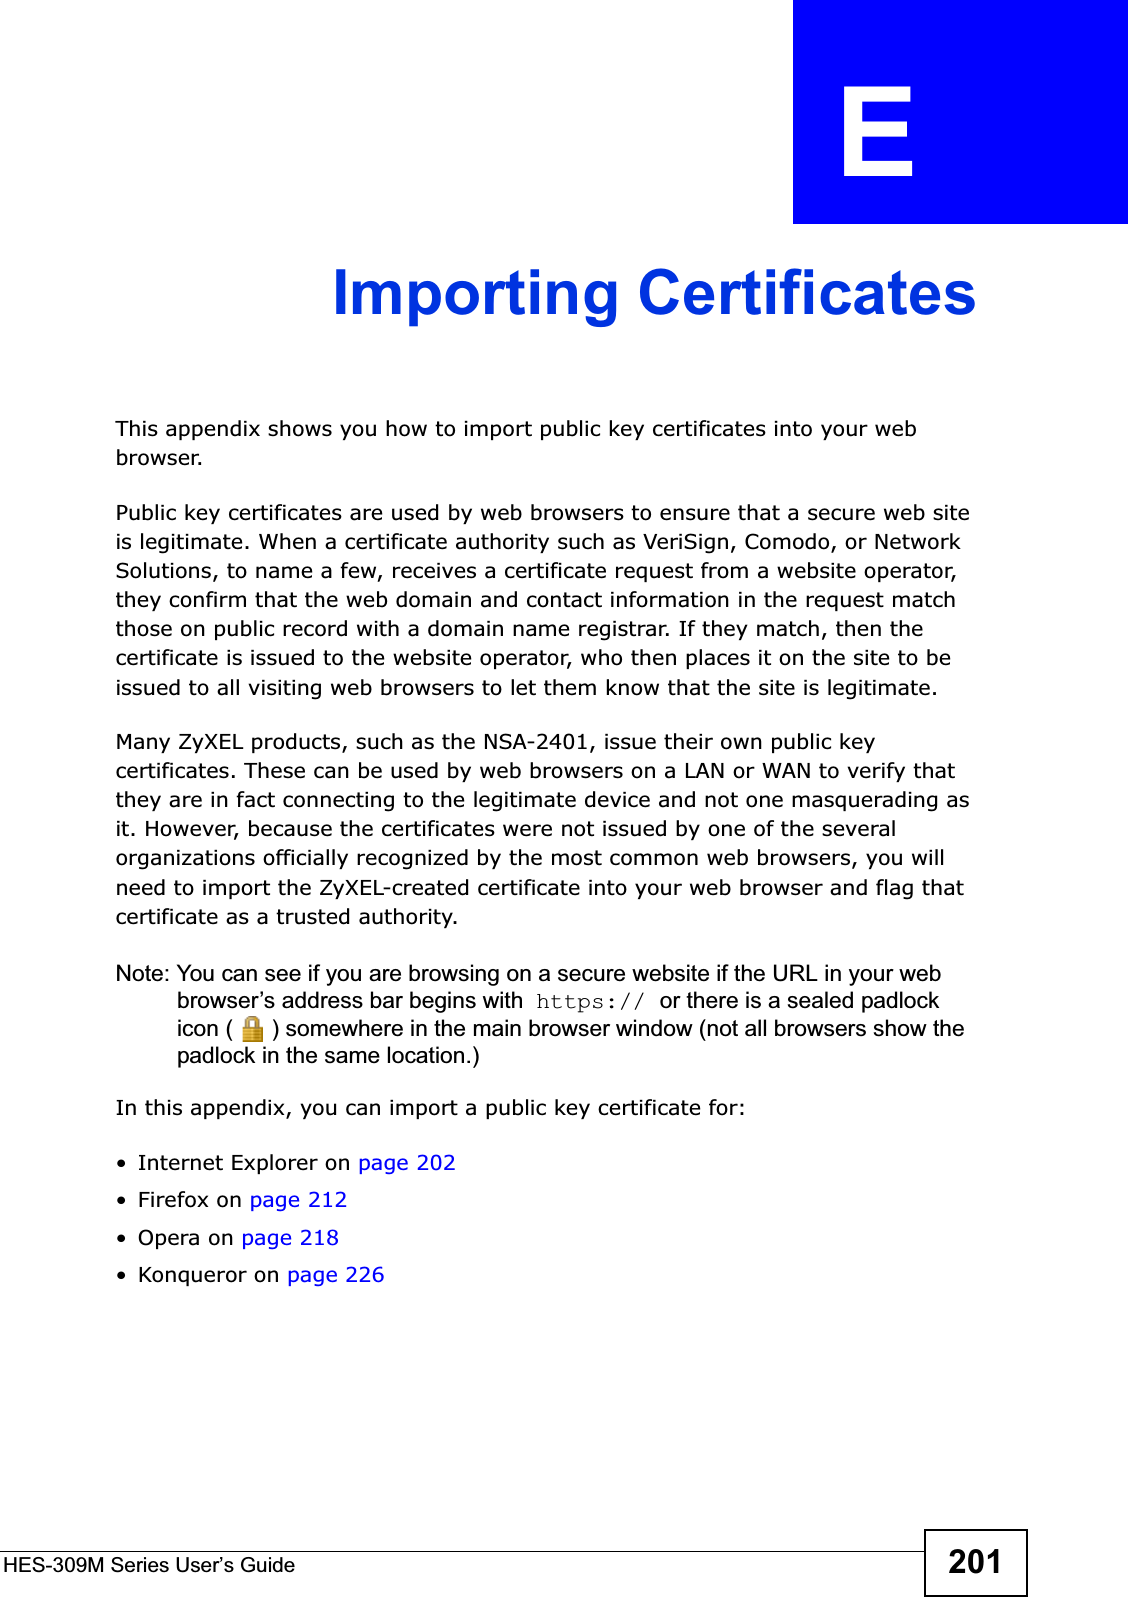 HES-309M Series User’s Guide 201APPENDIX  E Importing CertificatesThis appendix shows you how to import public key certificates into your web browser. Public key certificates are used by web browsers to ensure that a secure web site is legitimate. When a certificate authority such as VeriSign, Comodo, or Network Solutions, to name a few, receives a certificate request from a website operator, they confirm that the web domain and contact information in the request match those on public record with a domain name registrar. If they match, then the certificate is issued to the website operator, who then places it on the site to be issued to all visiting web browsers to let them know that the site is legitimate.Many ZyXEL products, such as the NSA-2401, issue their own public key certificates. These can be used by web browsers on a LAN or WAN to verify that they are in fact connecting to the legitimate device and not one masquerading as it. However, because the certificates were not issued by one of the several organizations officially recognized by the most common web browsers, you will need to import the ZyXEL-created certificate into your web browser and flag that certificate as a trusted authority.Note: You can see if you are browsing on a secure website if the URL in your web browser’s address bar begins with  https:// or there is a sealed padlock icon ( ) somewhere in the main browser window (not all browsers show the padlock in the same location.)In this appendix, you can import a public key certificate for:• Internet Explorer on page 202•Firefox on page 212•Opera on page 218• Konqueror on page 226